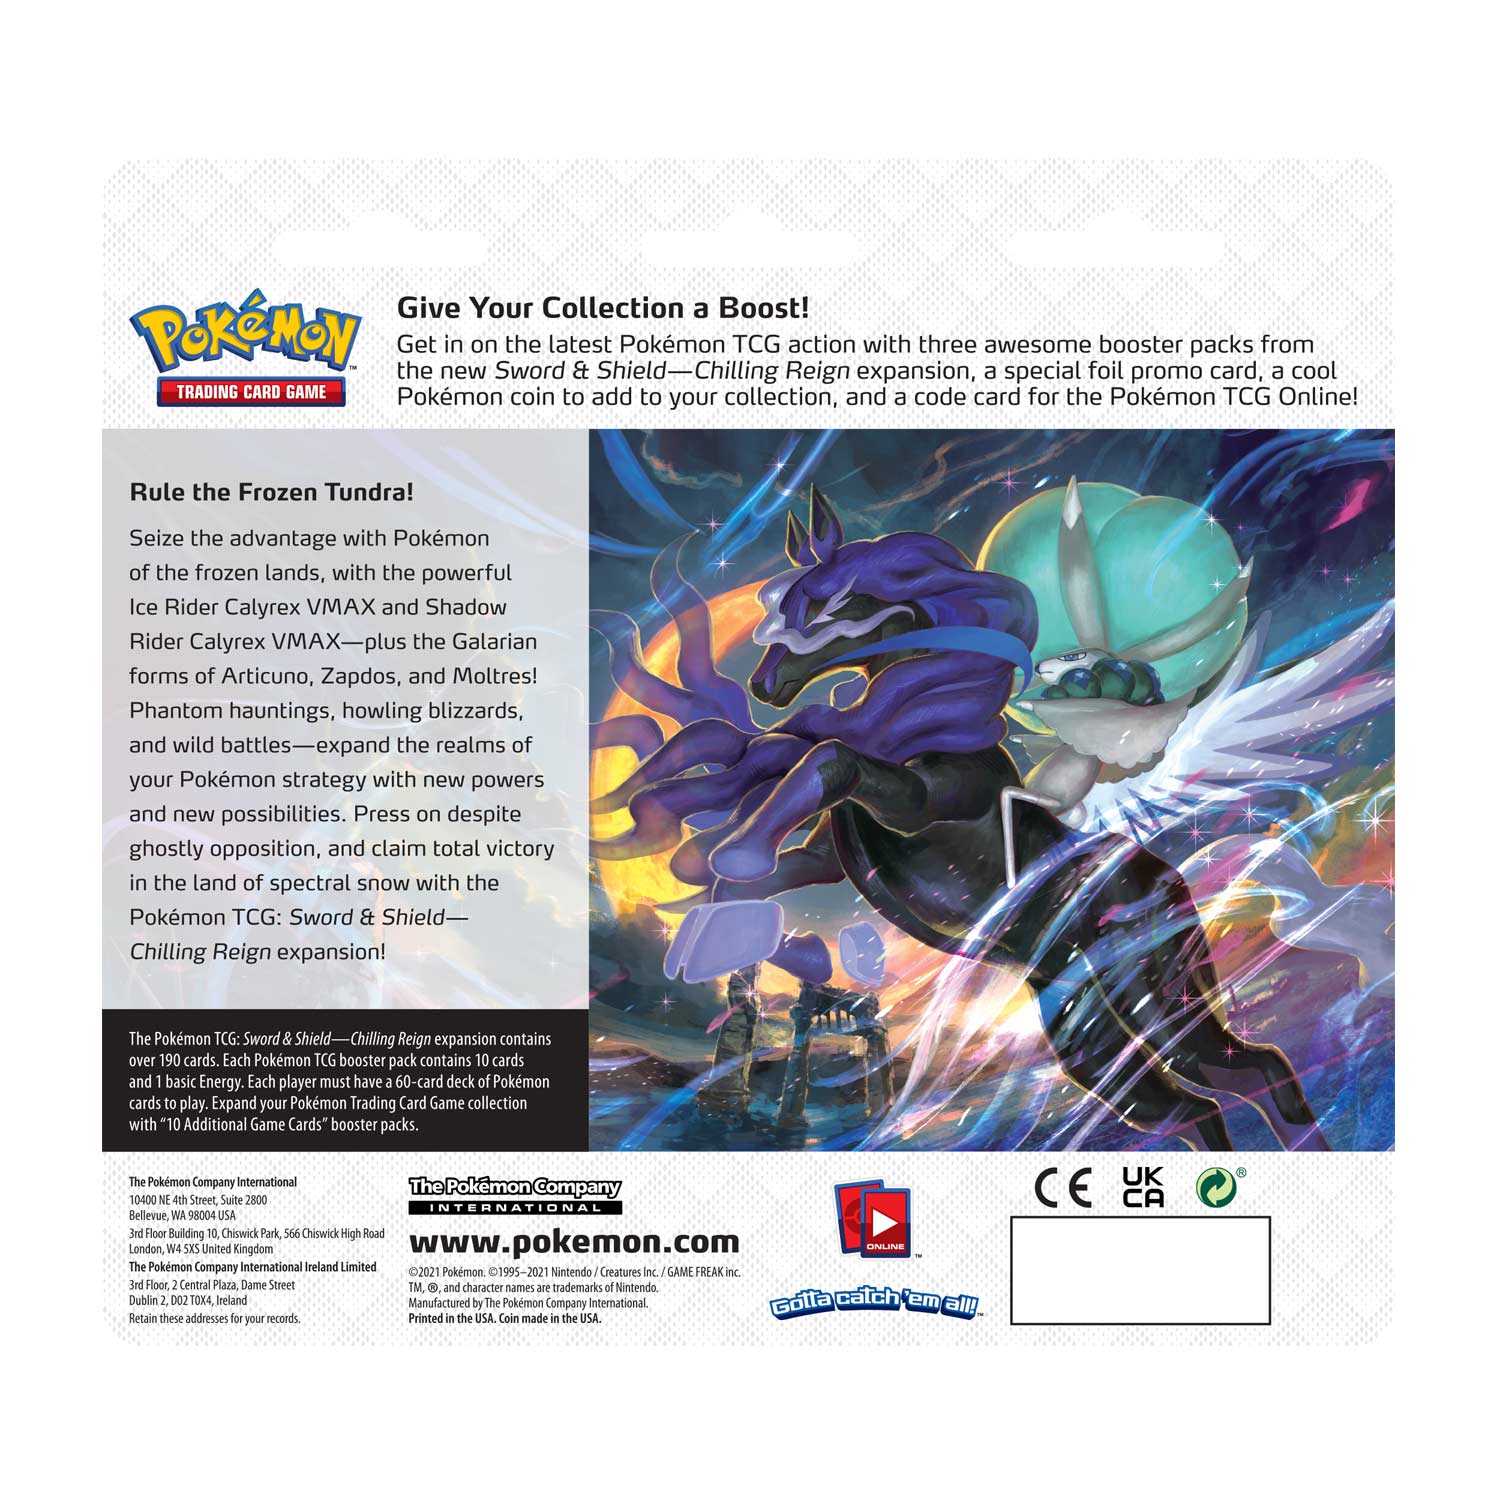 Pokemon TCG: Sword & Shield SS06 Chilling Reign 3 Packs Blister-Both Design (Eevee & Snorlax)-The Pokémon Company International-Ace Cards & Collectibles